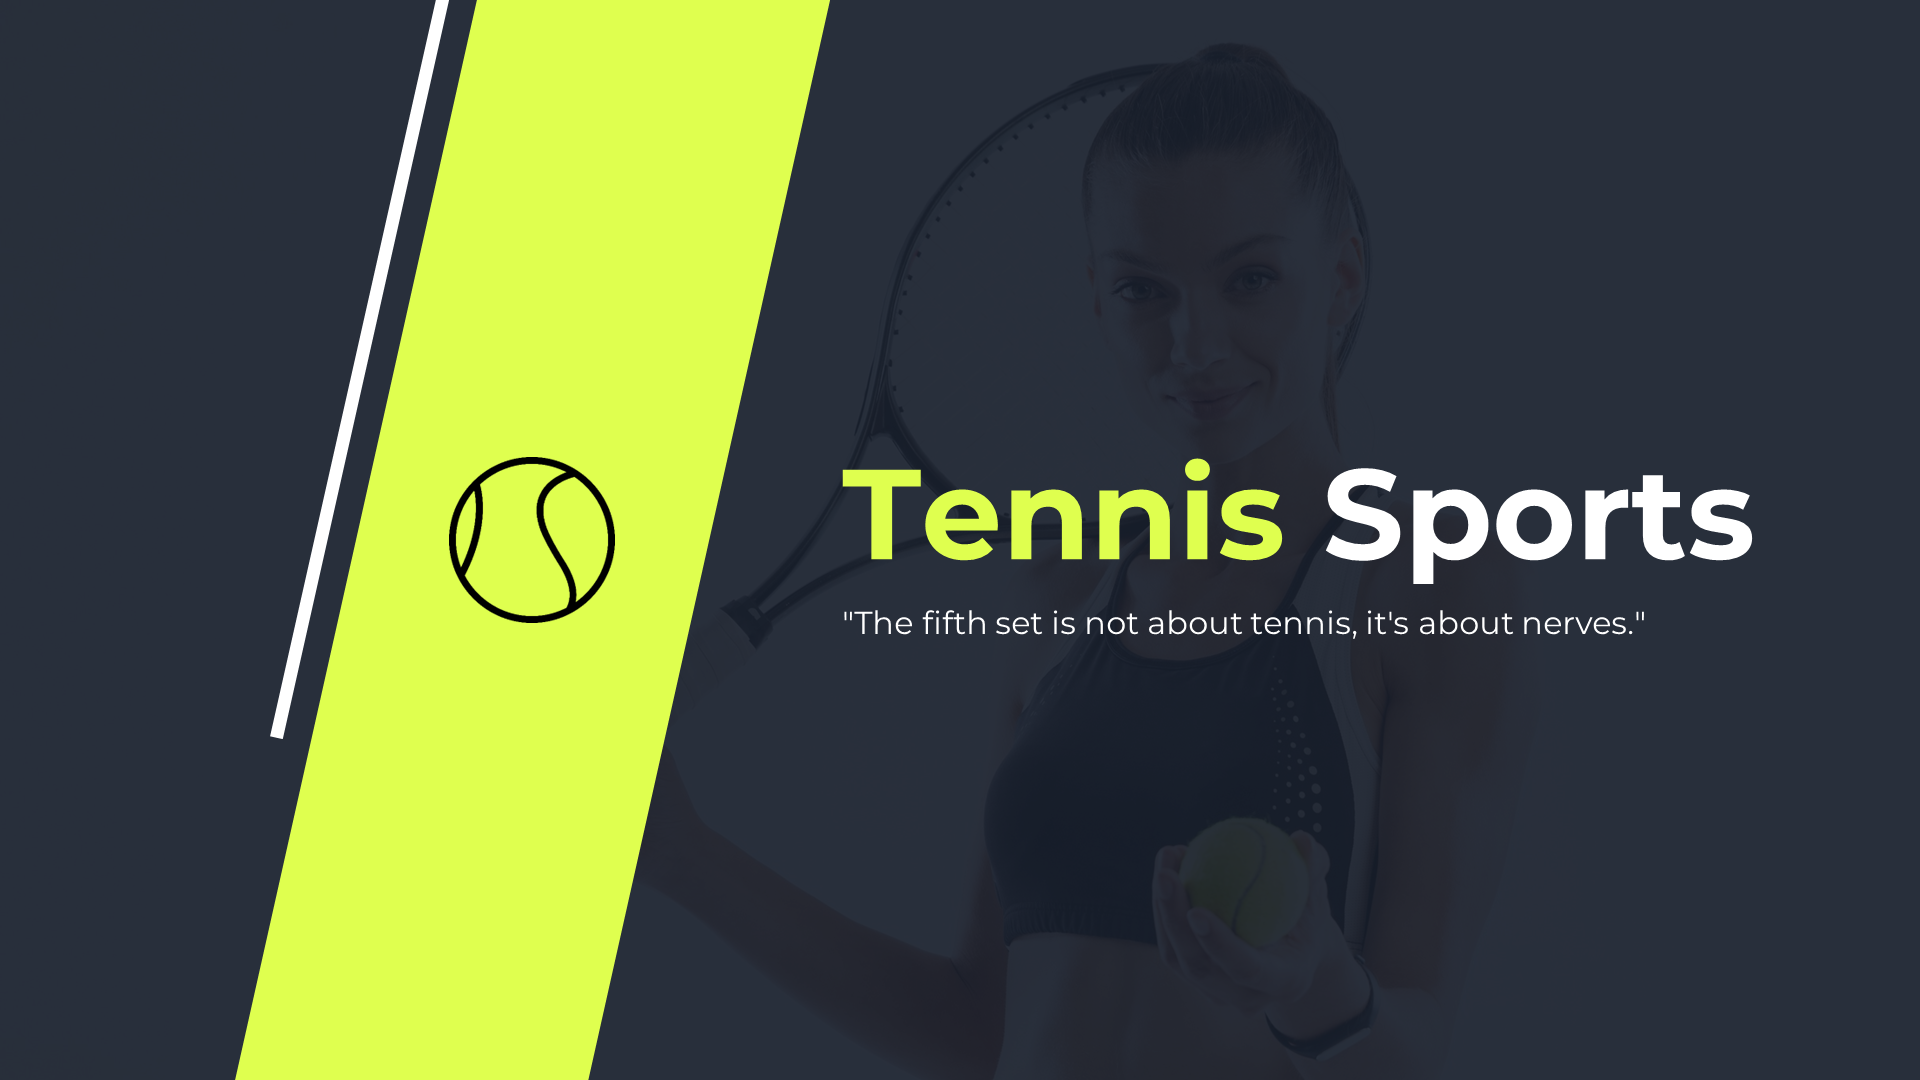 PowerPoint Sports Templates